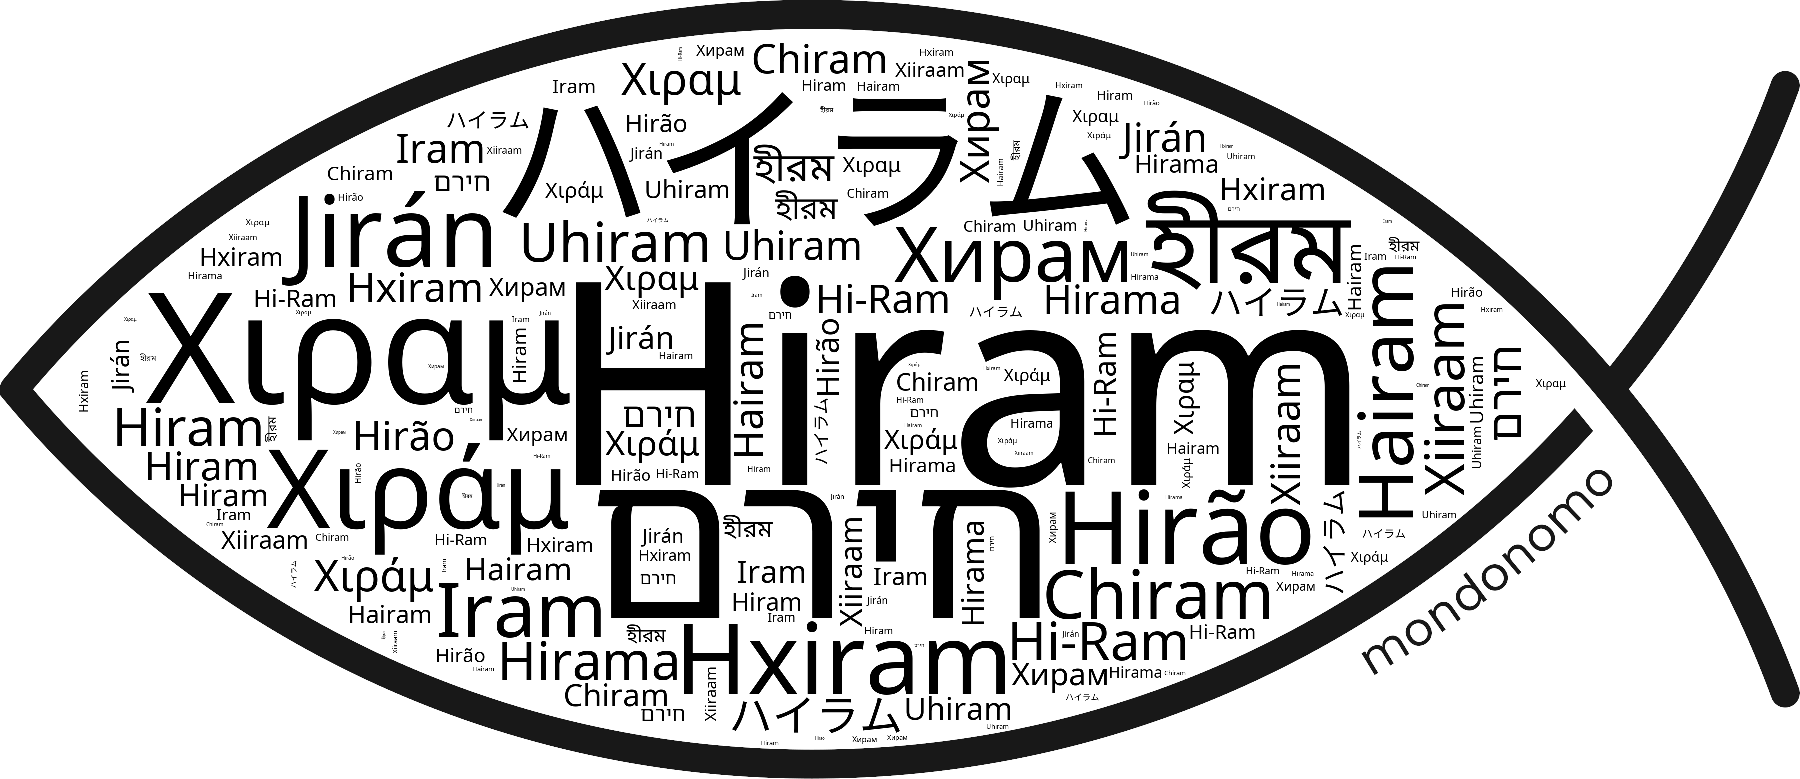 Name Hiram in the world's Bibles